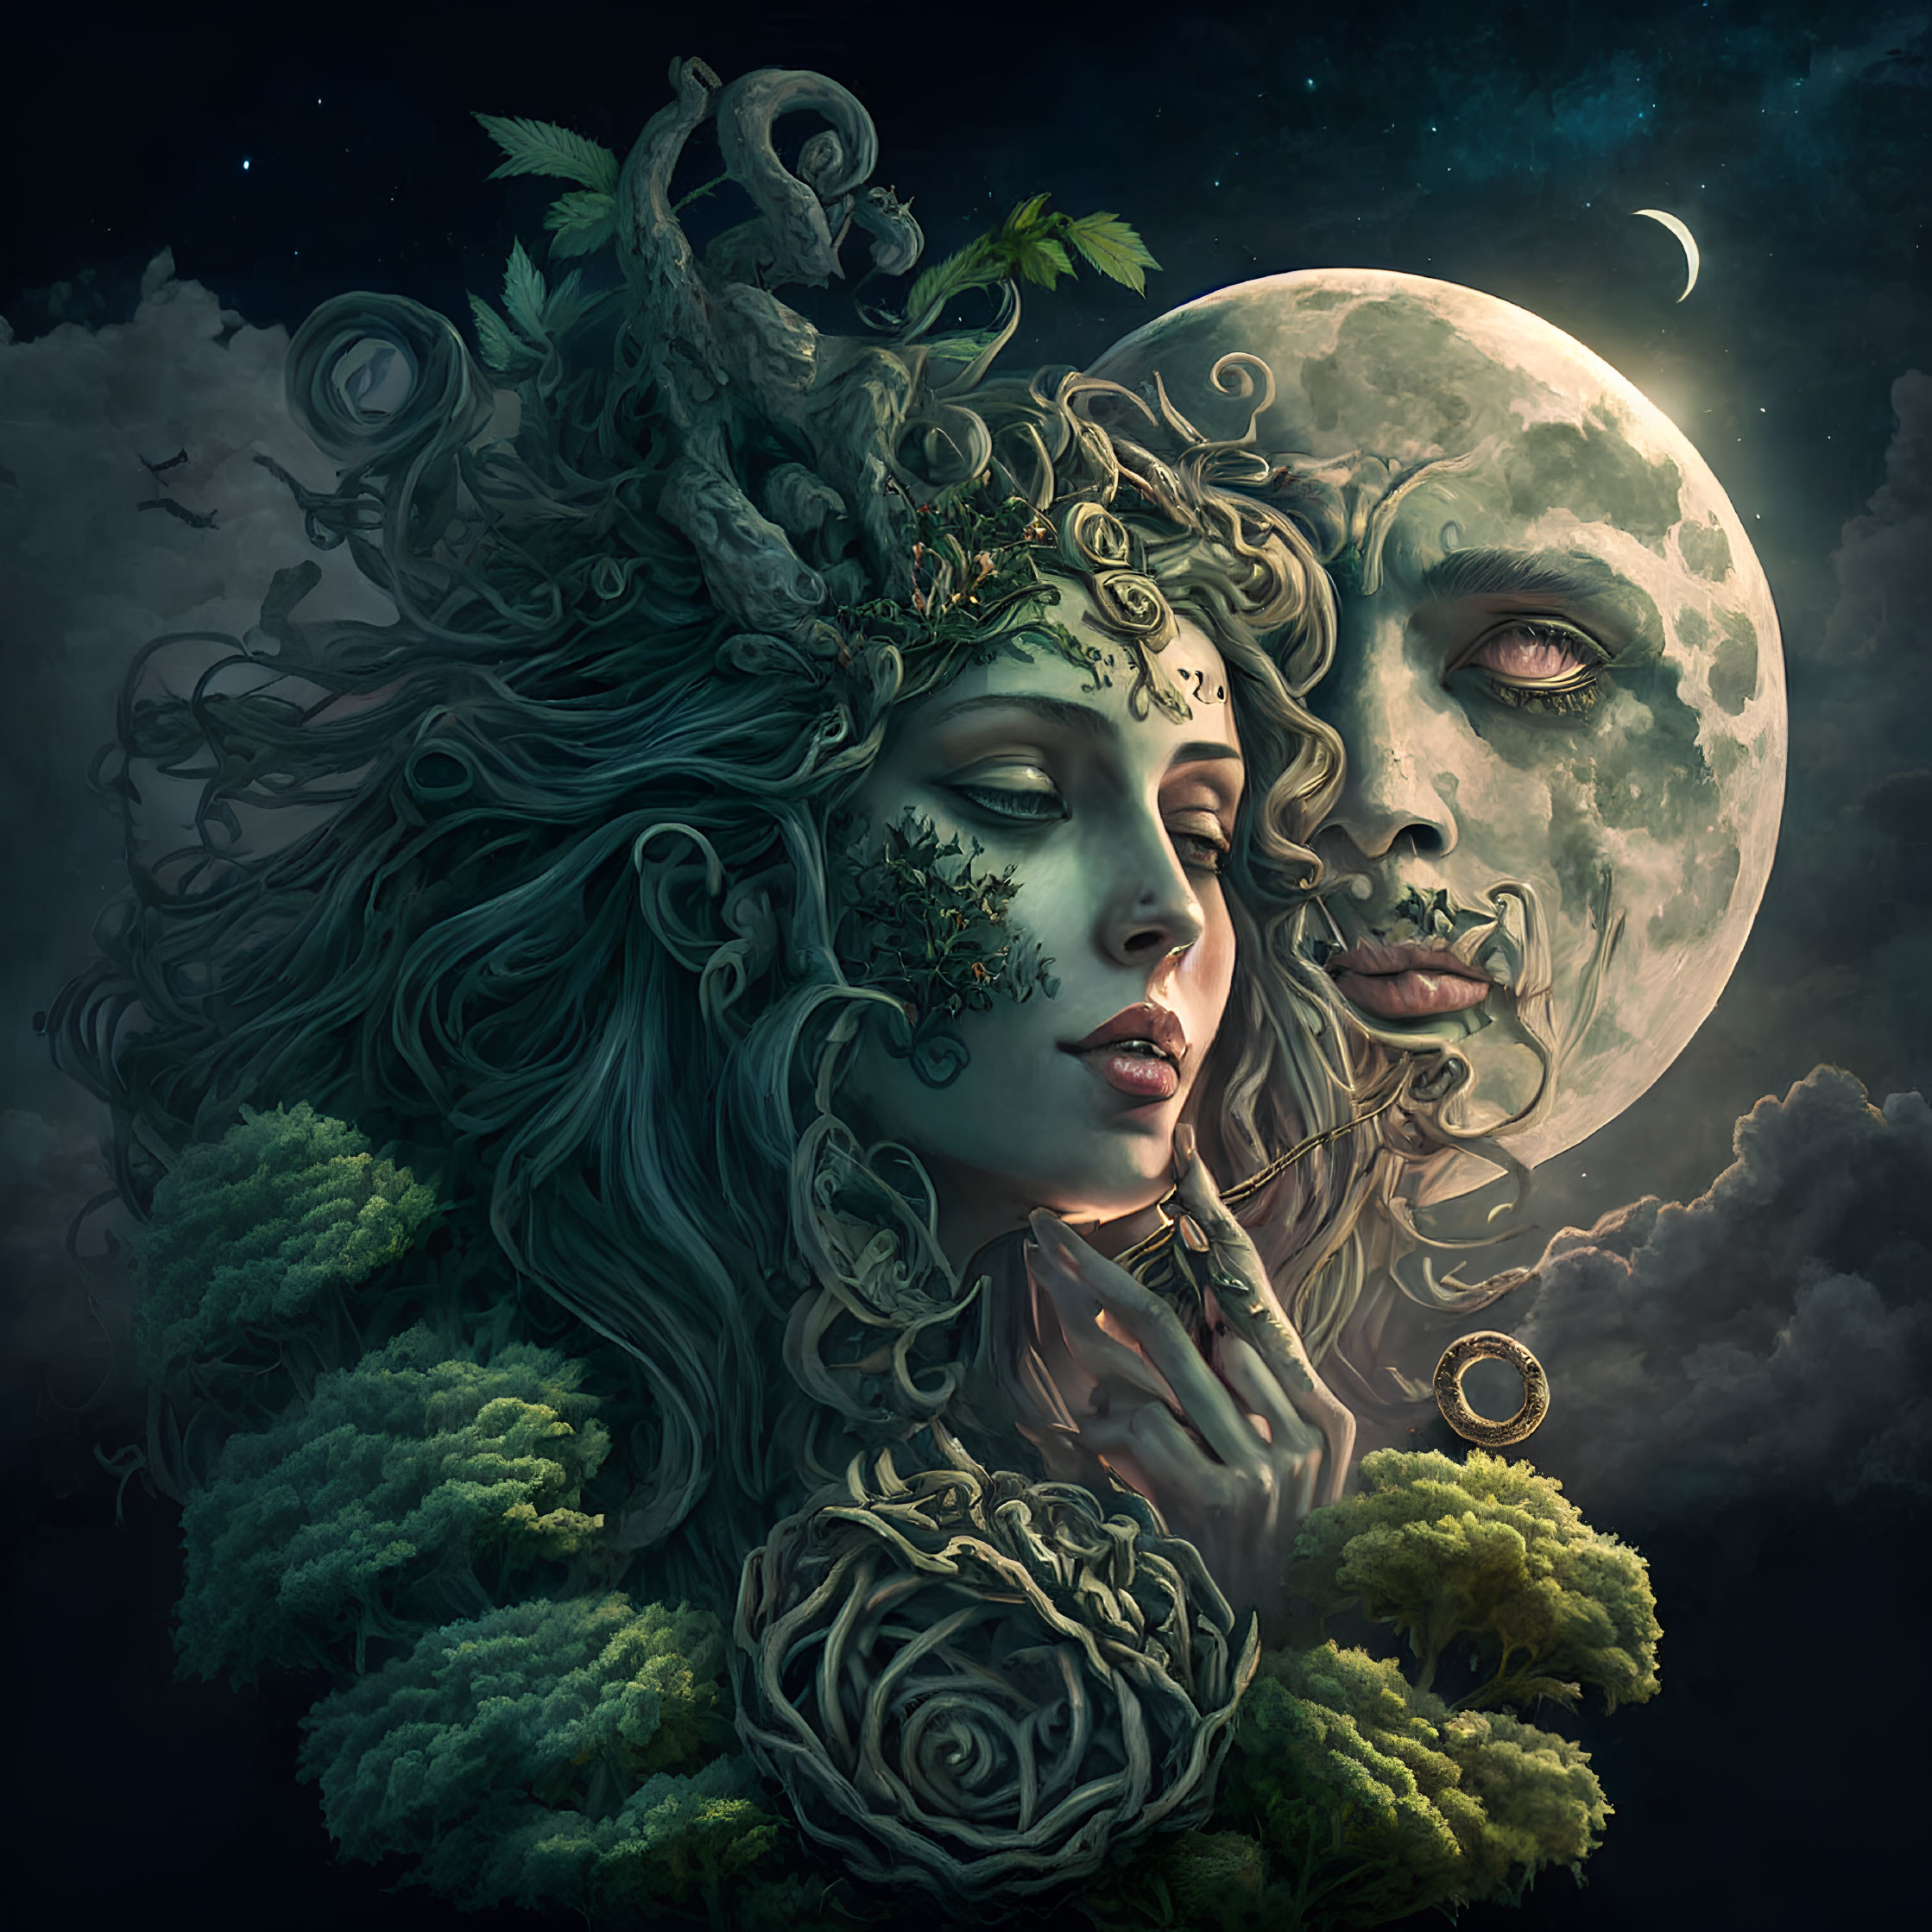 Portrait of woman with leafy adornments and moon background.